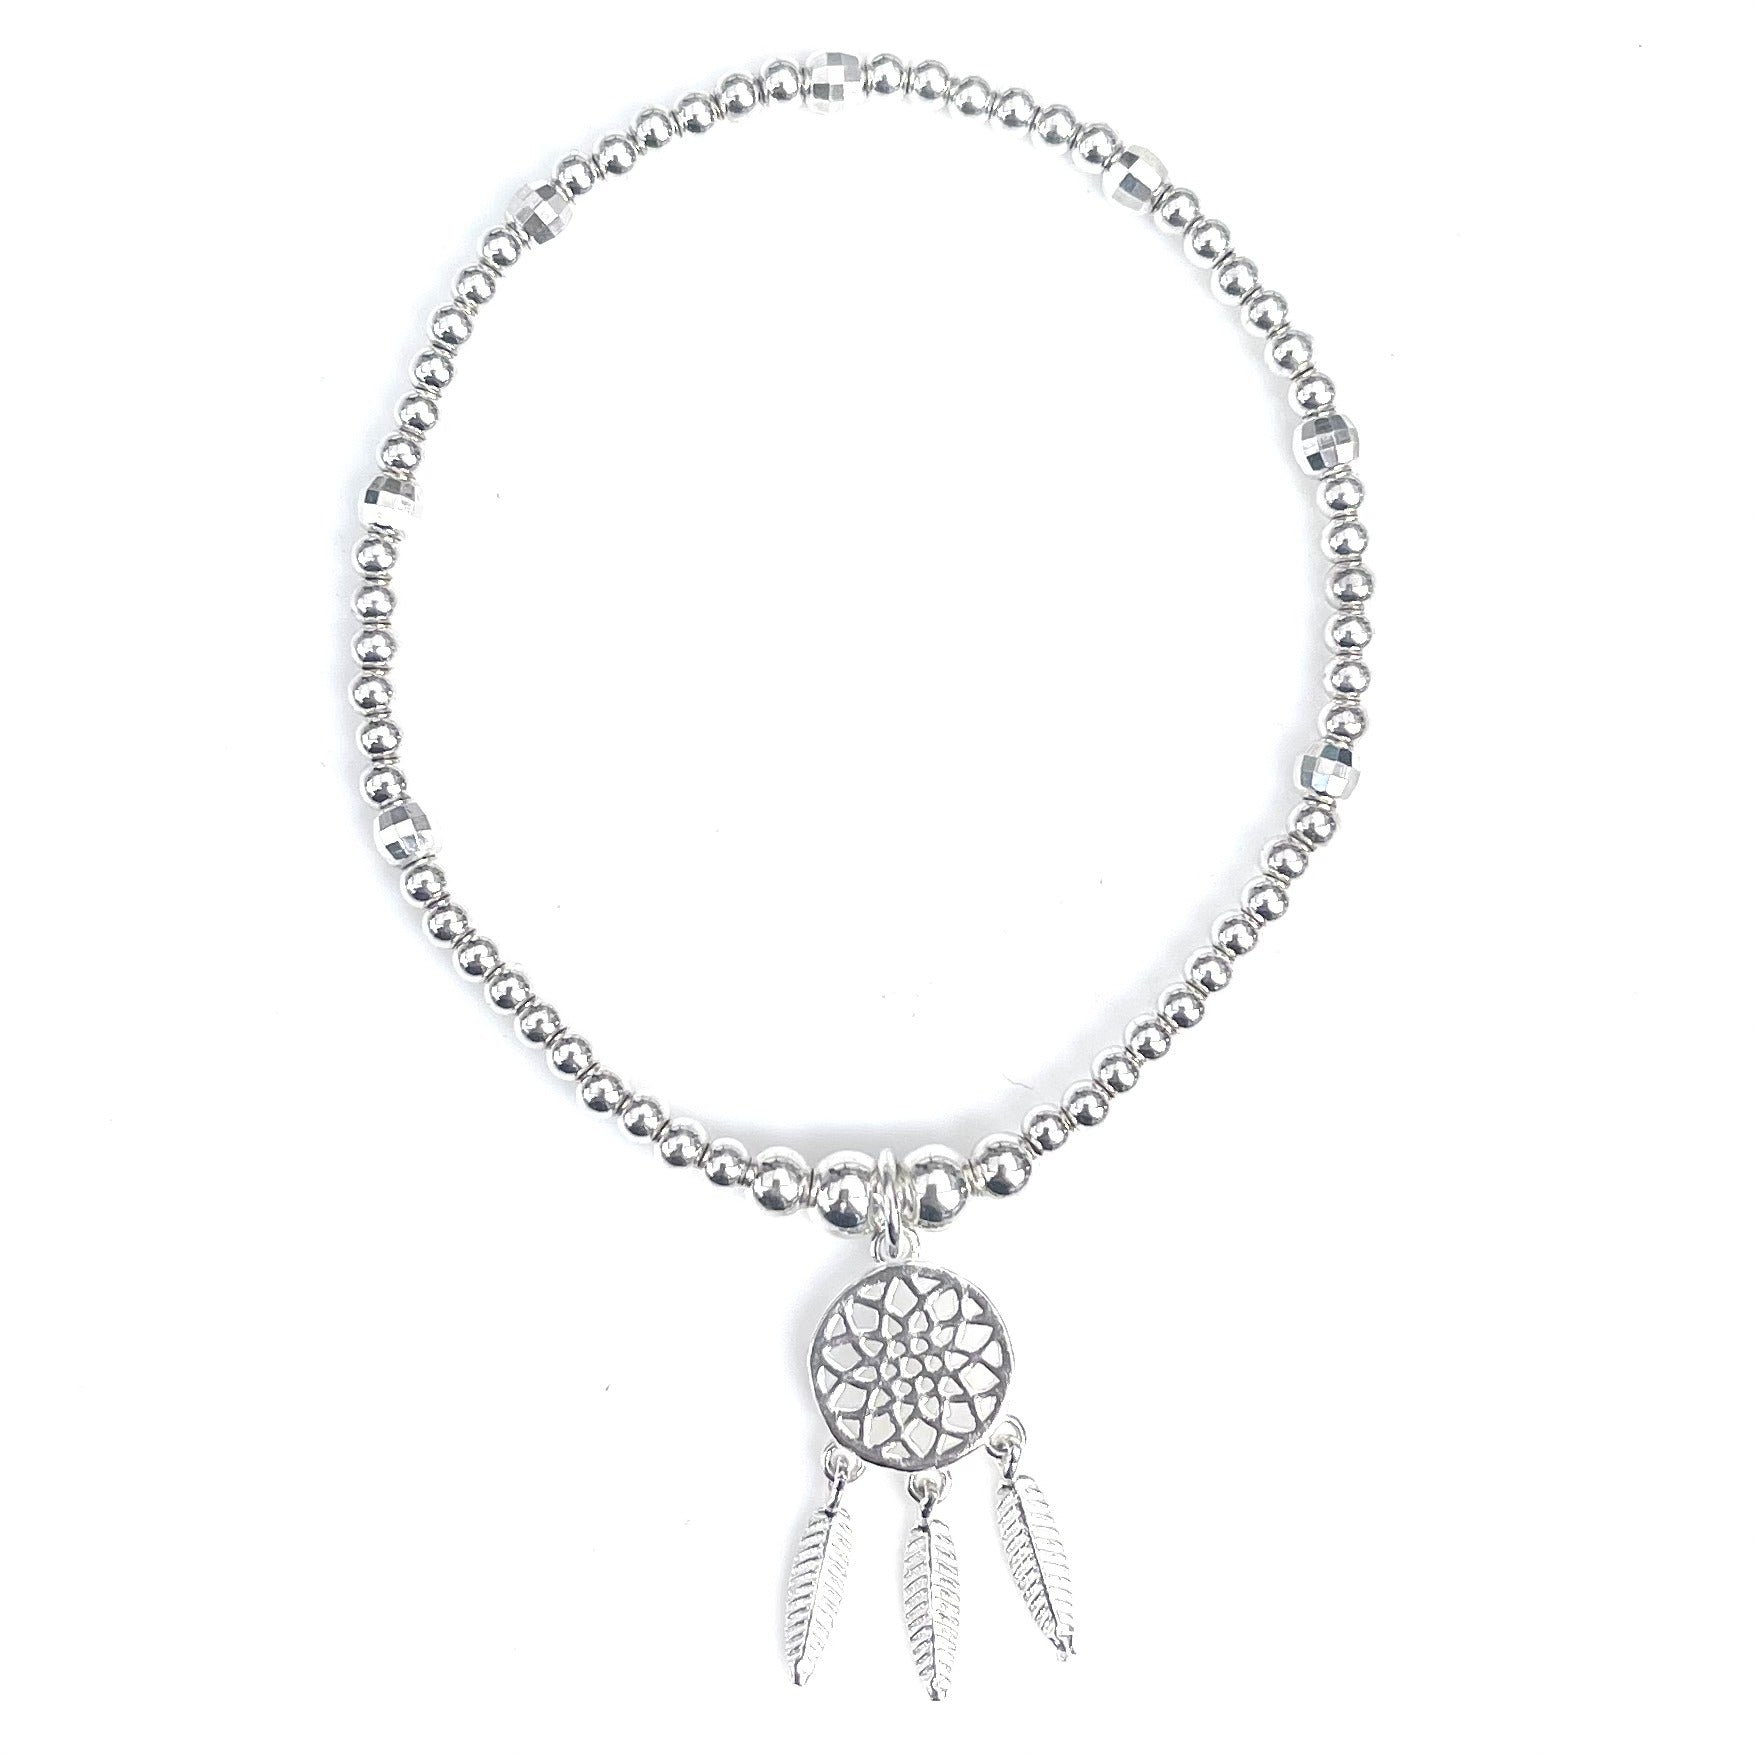 Silver Stacking Stretch Bracelet with Dreamcatcher charm